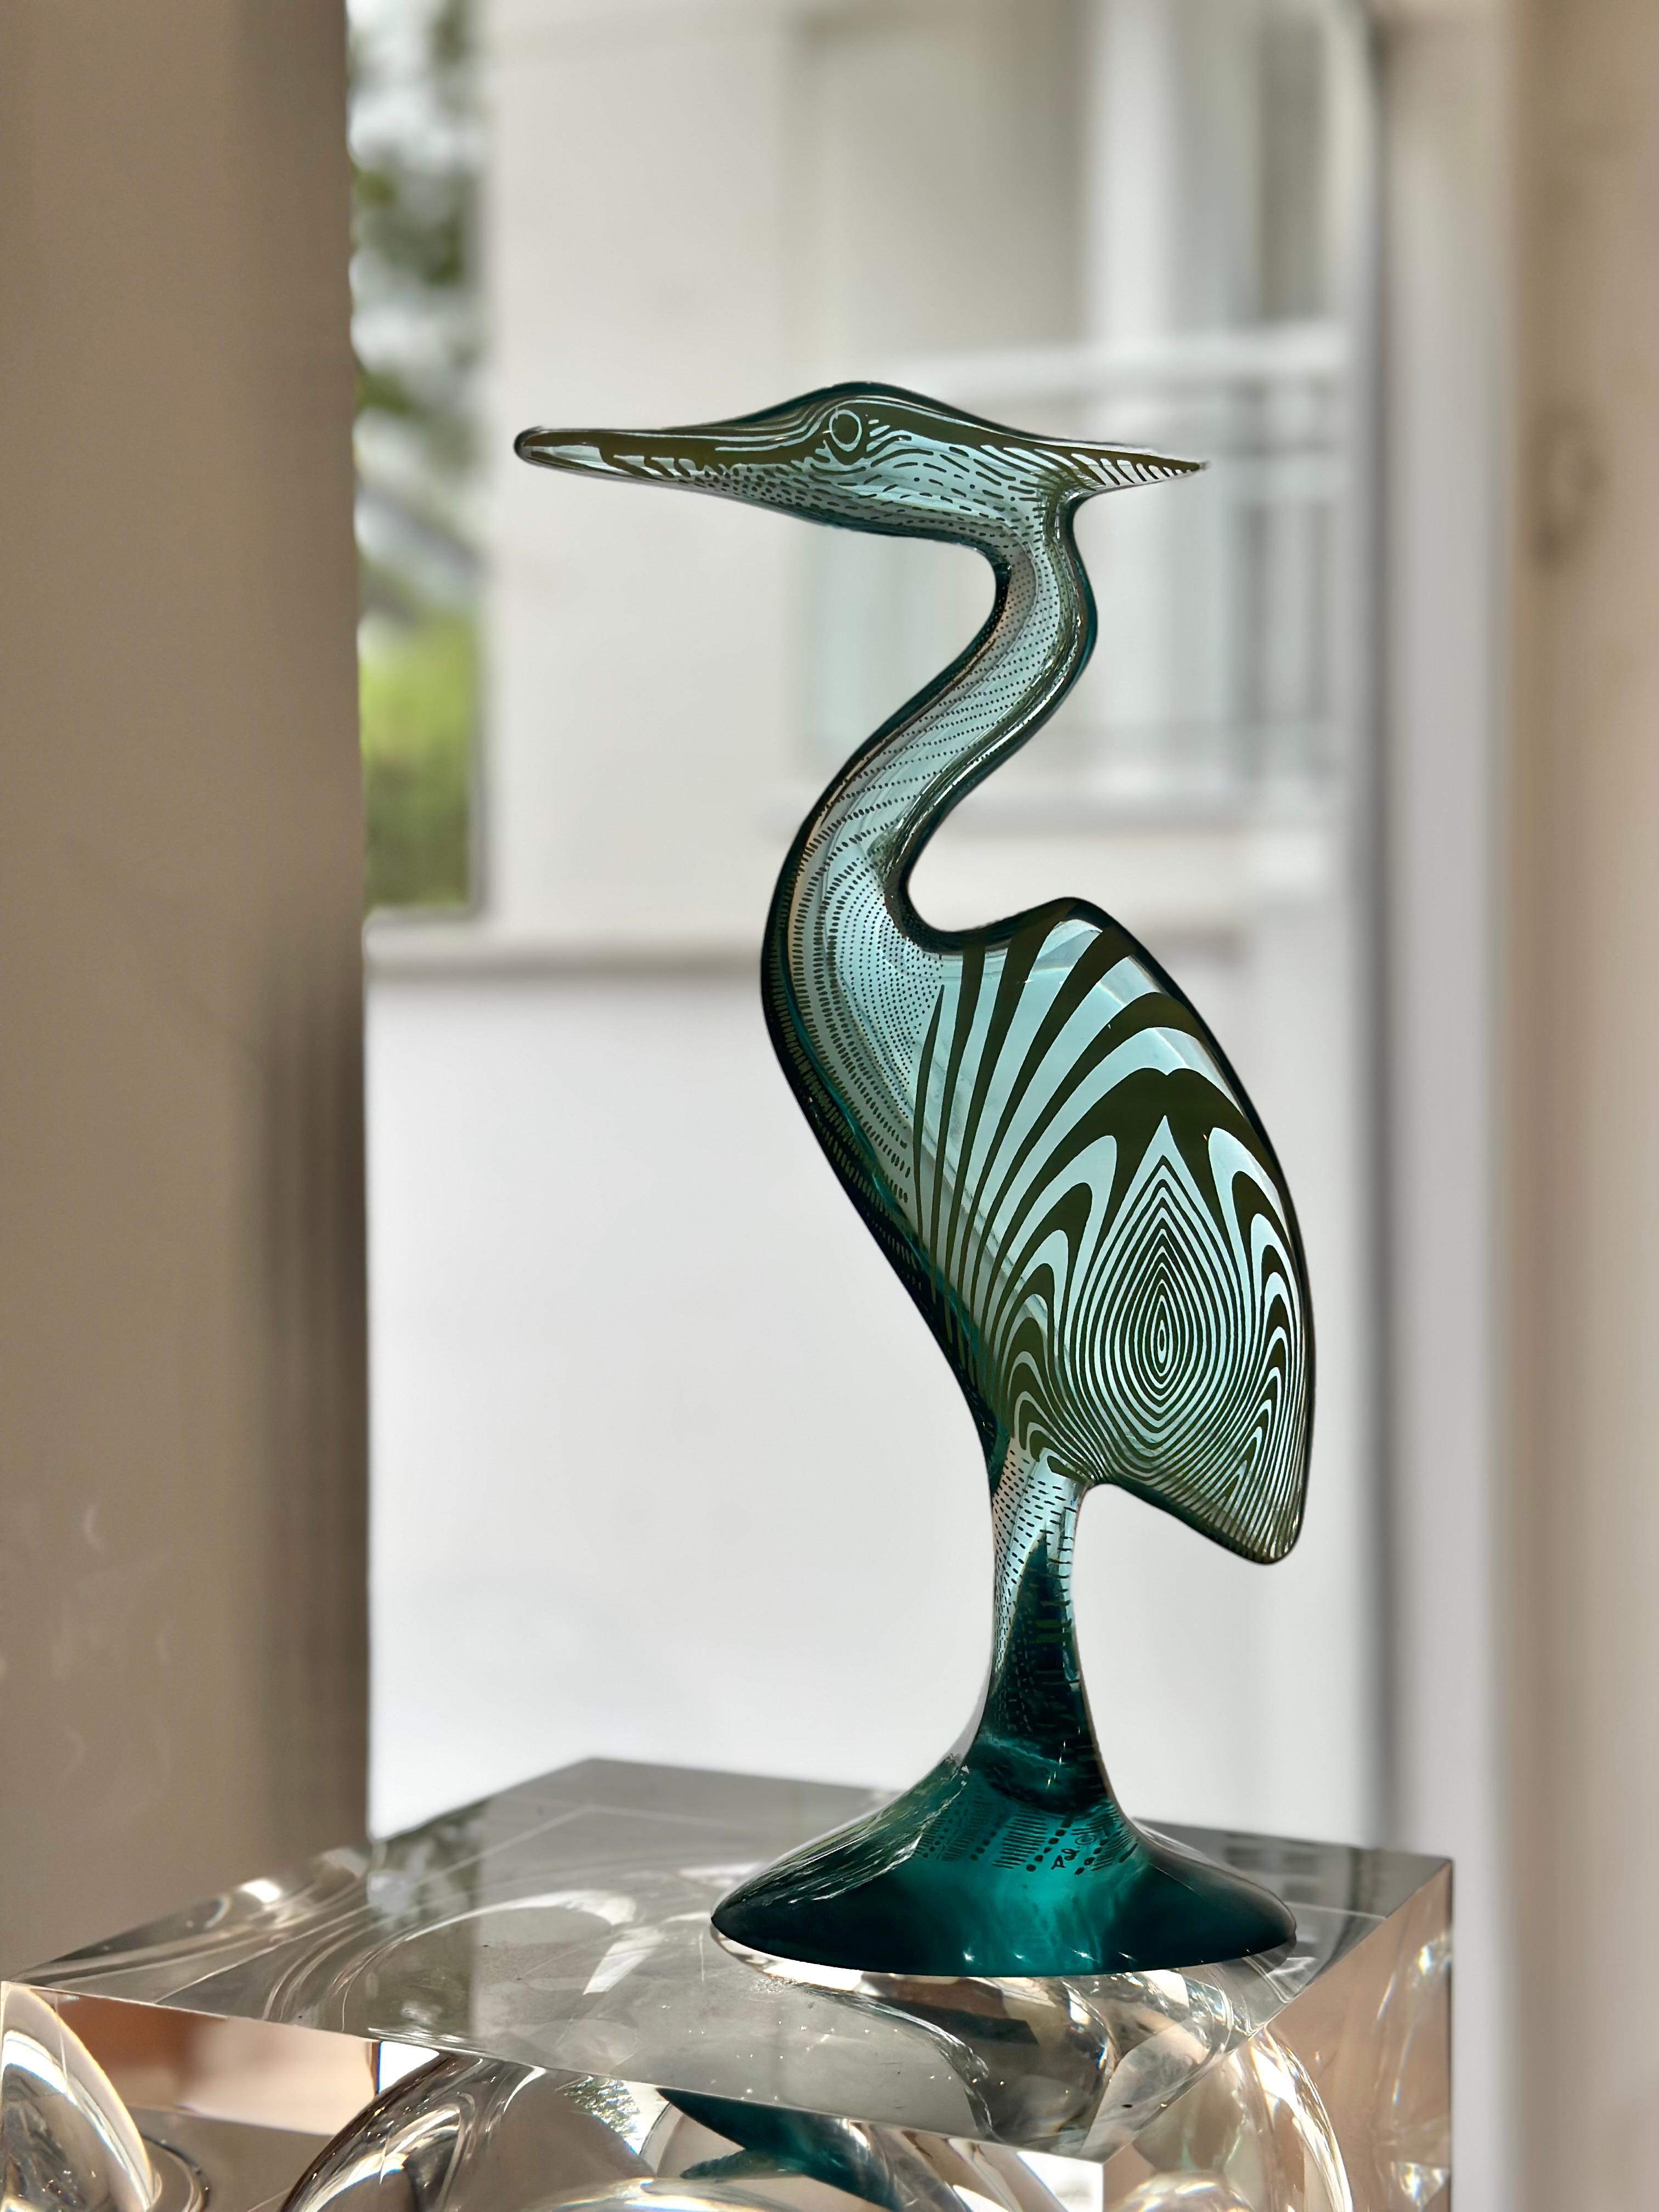 Rare Brazilian modern kinetic sculpture in turquoise made of acrylic resin designed by Abraham Palatnik, part of Artemis Collection made in the 1970's. 